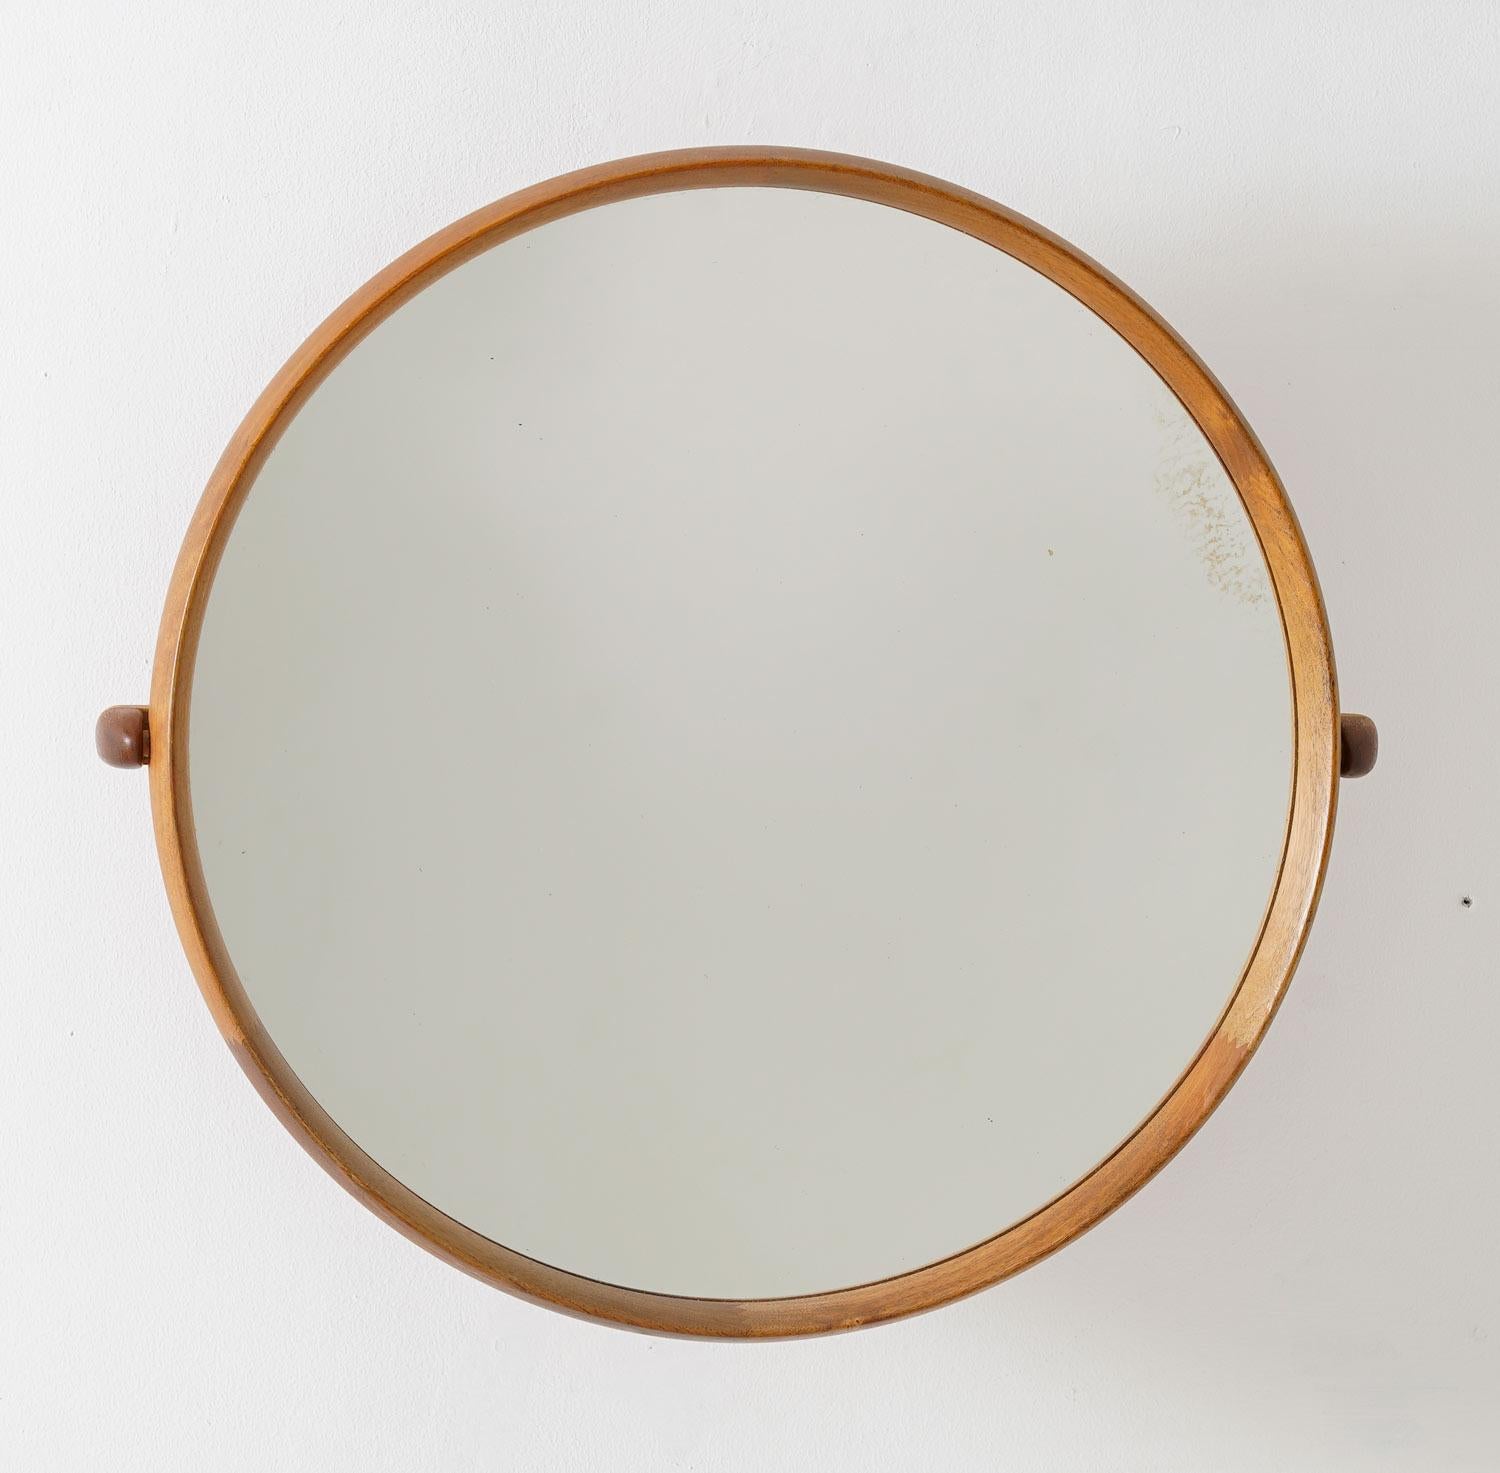 Beautiful round midcentury mirror by Uno & Östen Kristiansson for Luxus, Sweden.
The wall-mounted mirror with a swivel arm is made in teak with details in oak. 

Condition: Very good condition with signs of age on the mirror glass (a few spots).